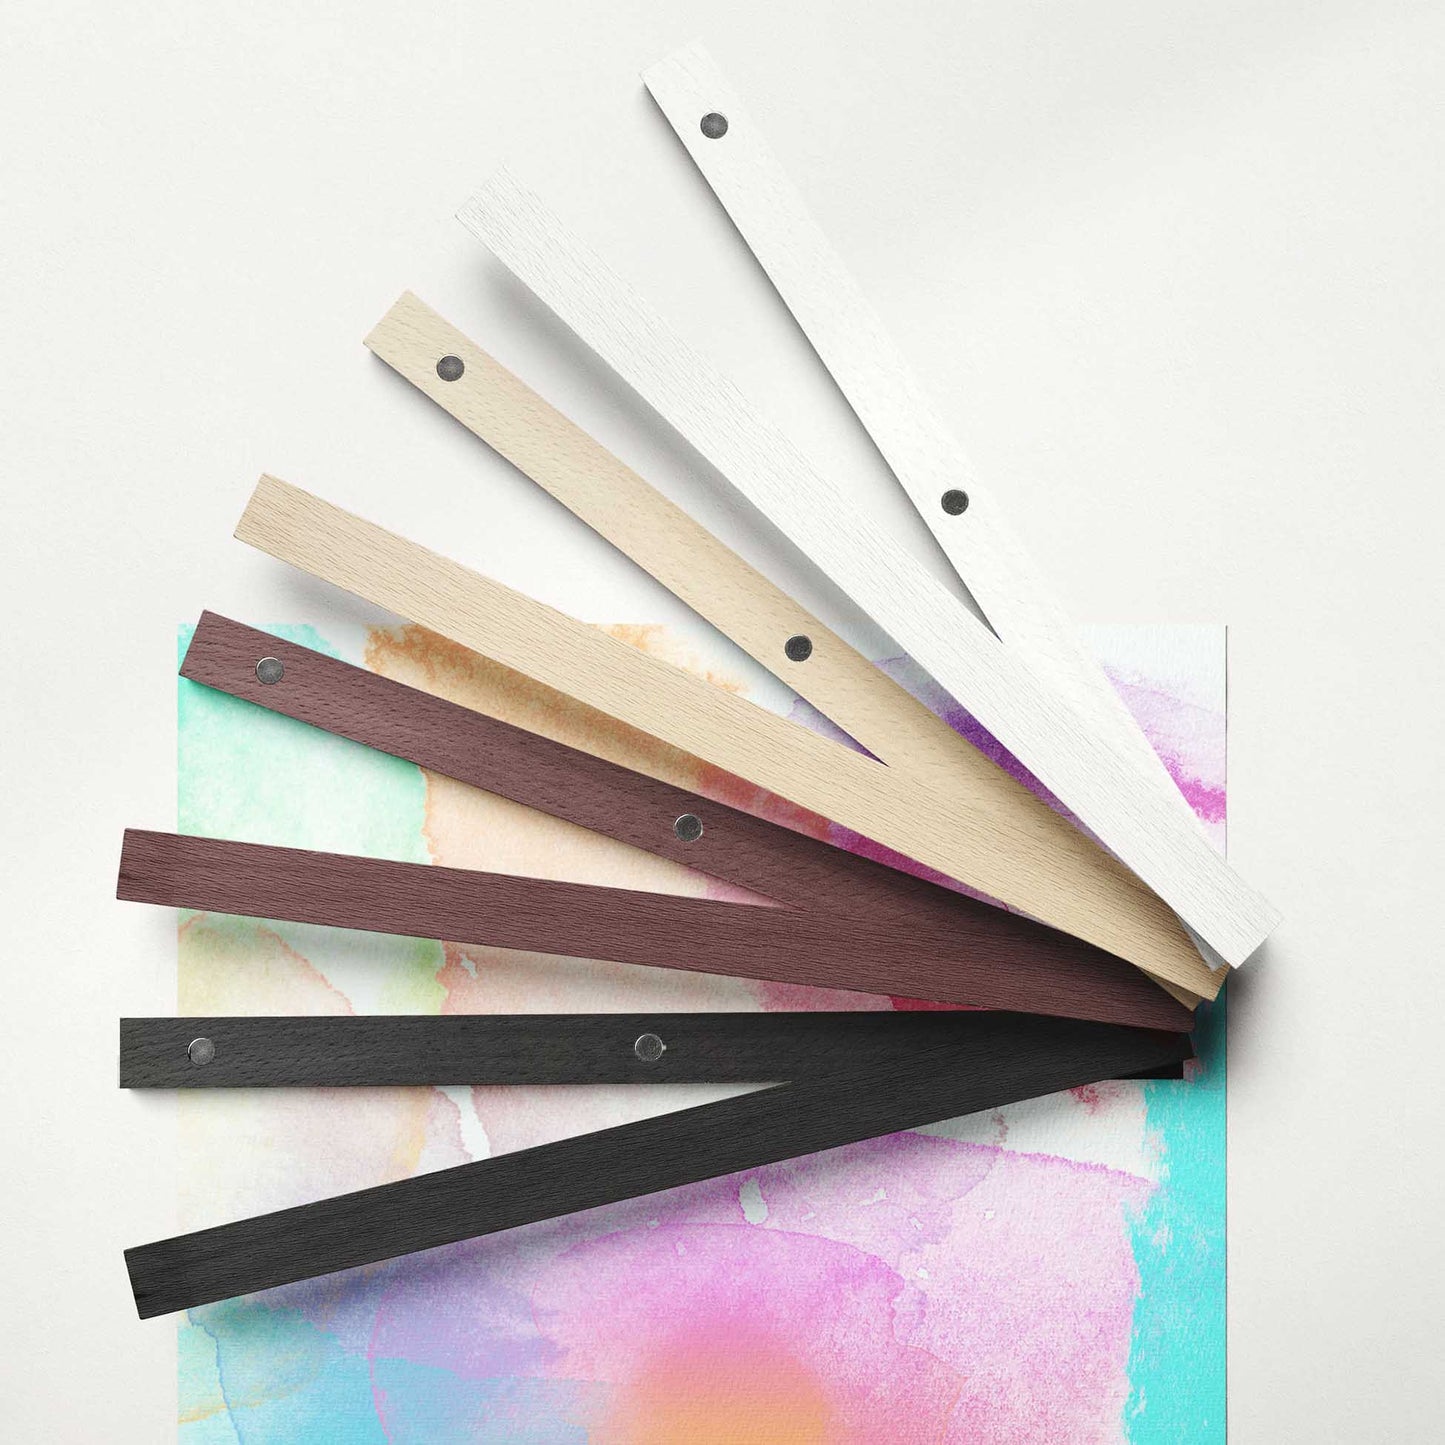 Elevate your space with the Personalised Abstract Lines Poster Hanger. Its abstract style brings a sense of excitement and joy, making it the perfect gift for family and friends. The museum-quality paper ensures a full-color image print